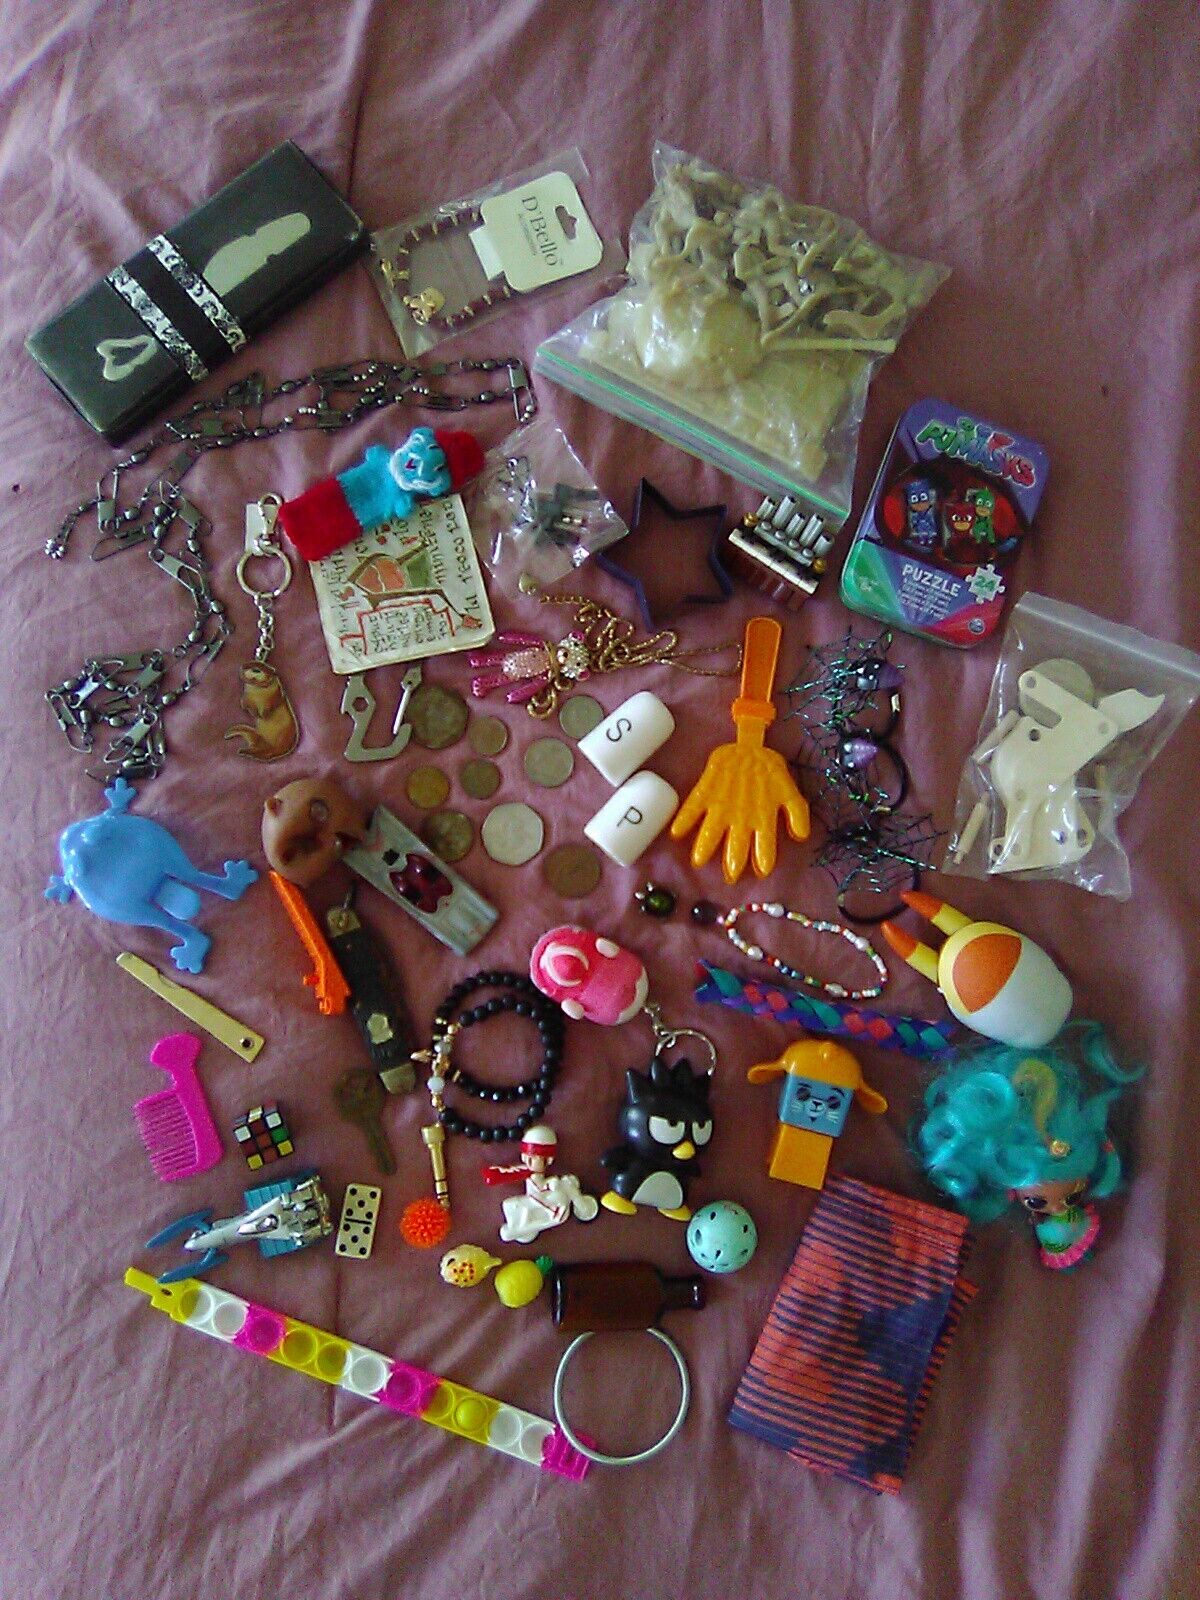 Junk Drawer Trinket Lot Casting Mis. Stuff Jewelry Toys Coins Keychains Knife